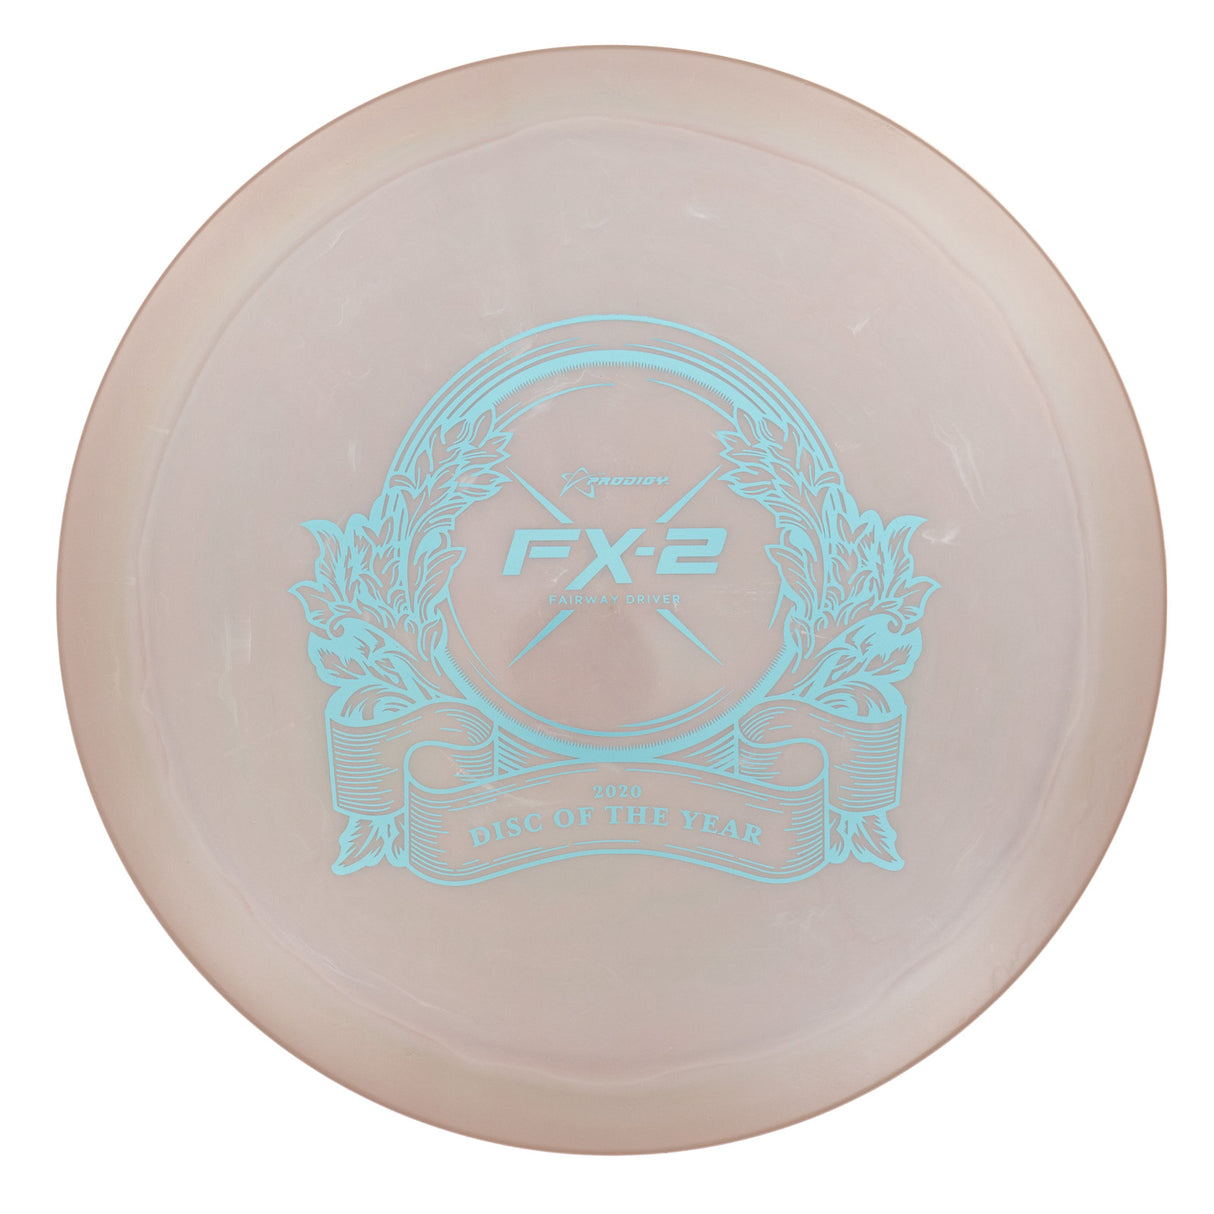 Prodigy FX-2 - 2020 Disc of the Year 500 173g | Style 0001